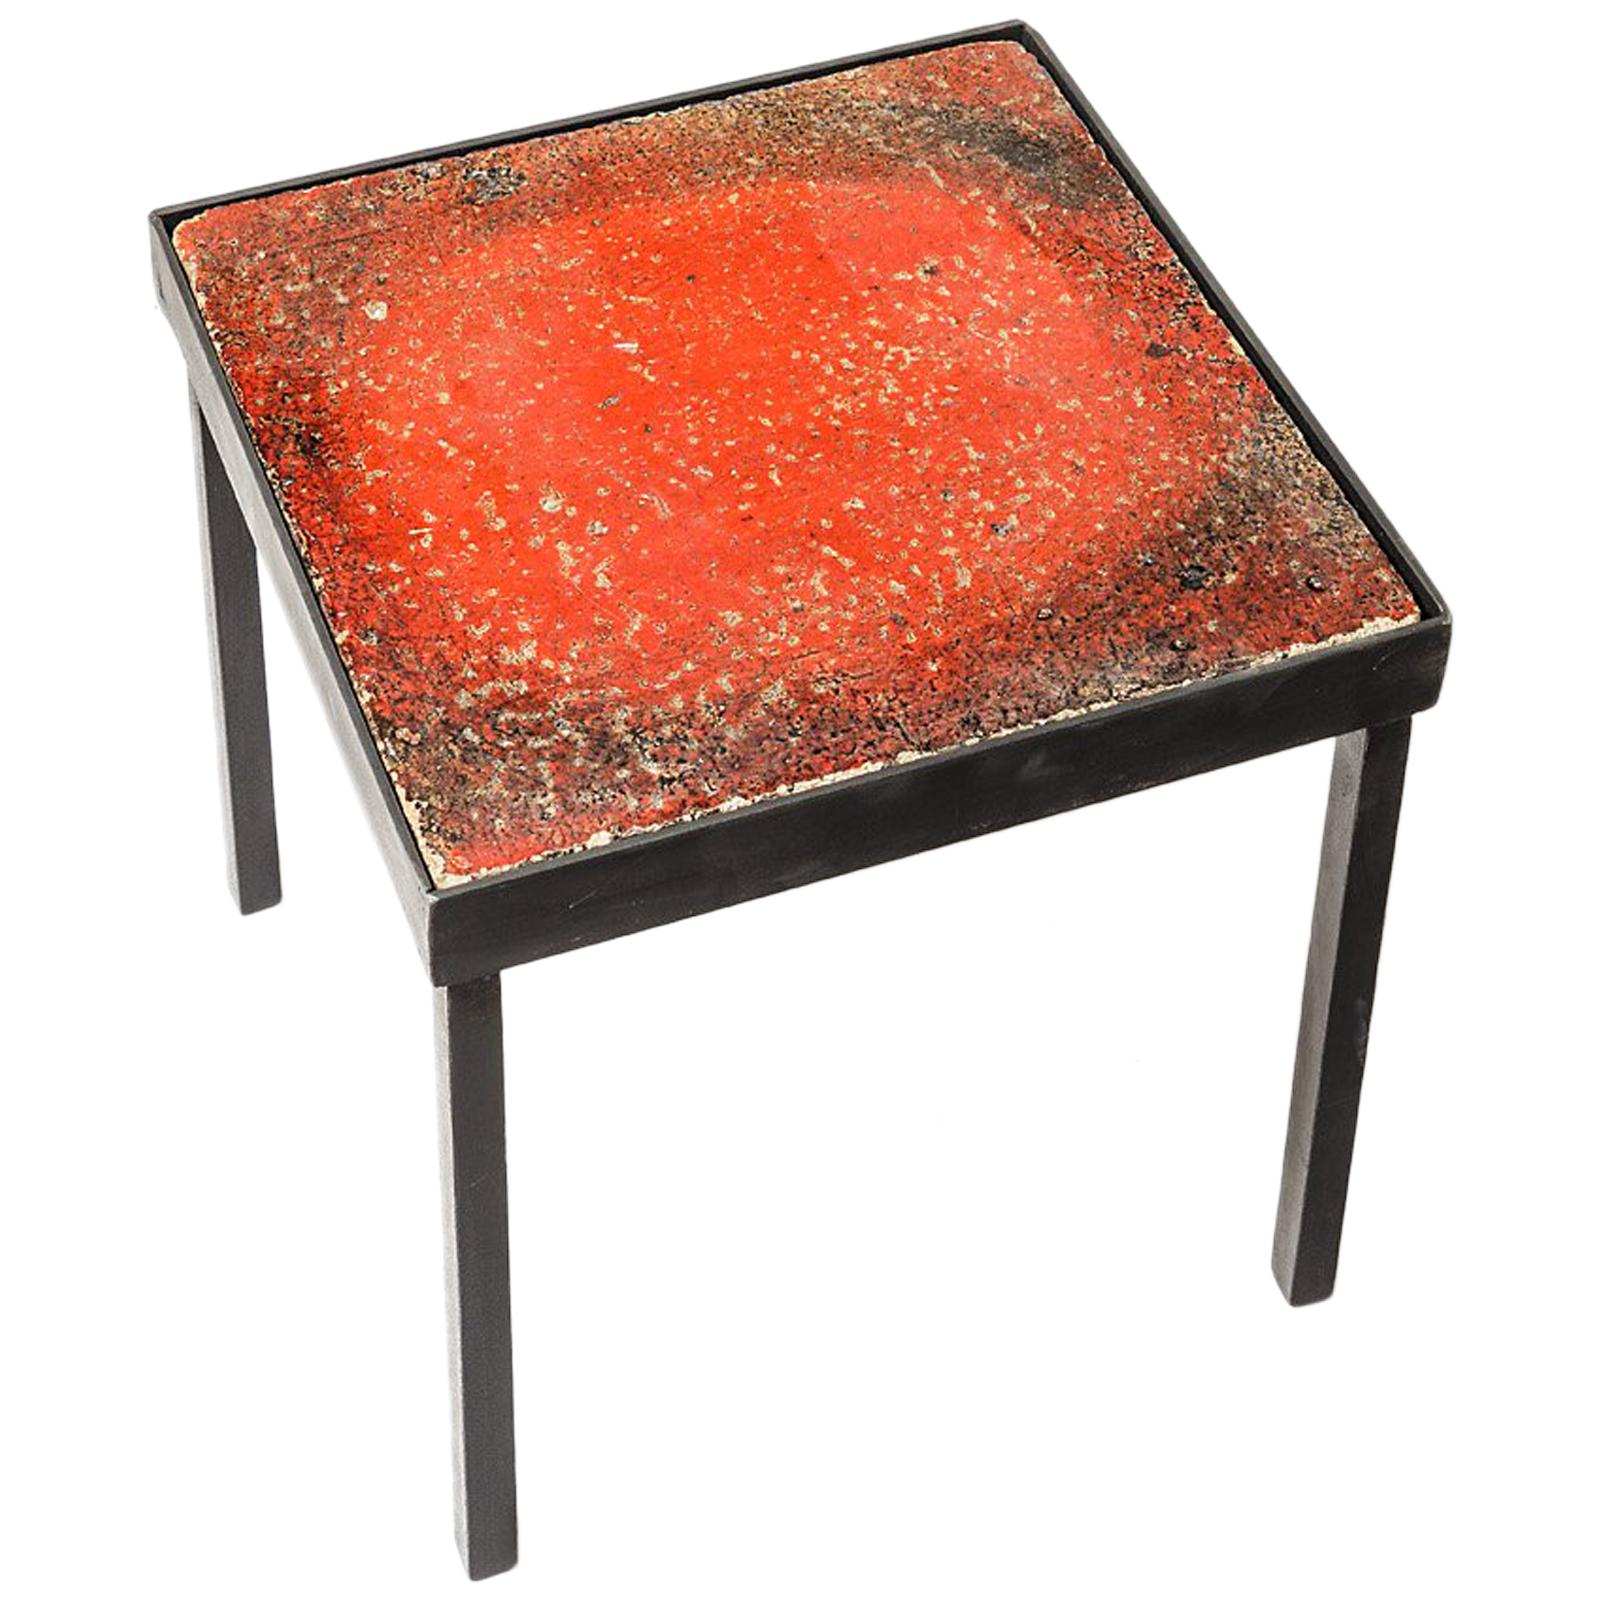 Red Ceramic Low Table or Sofa Table circa 1950 French Production For Sale